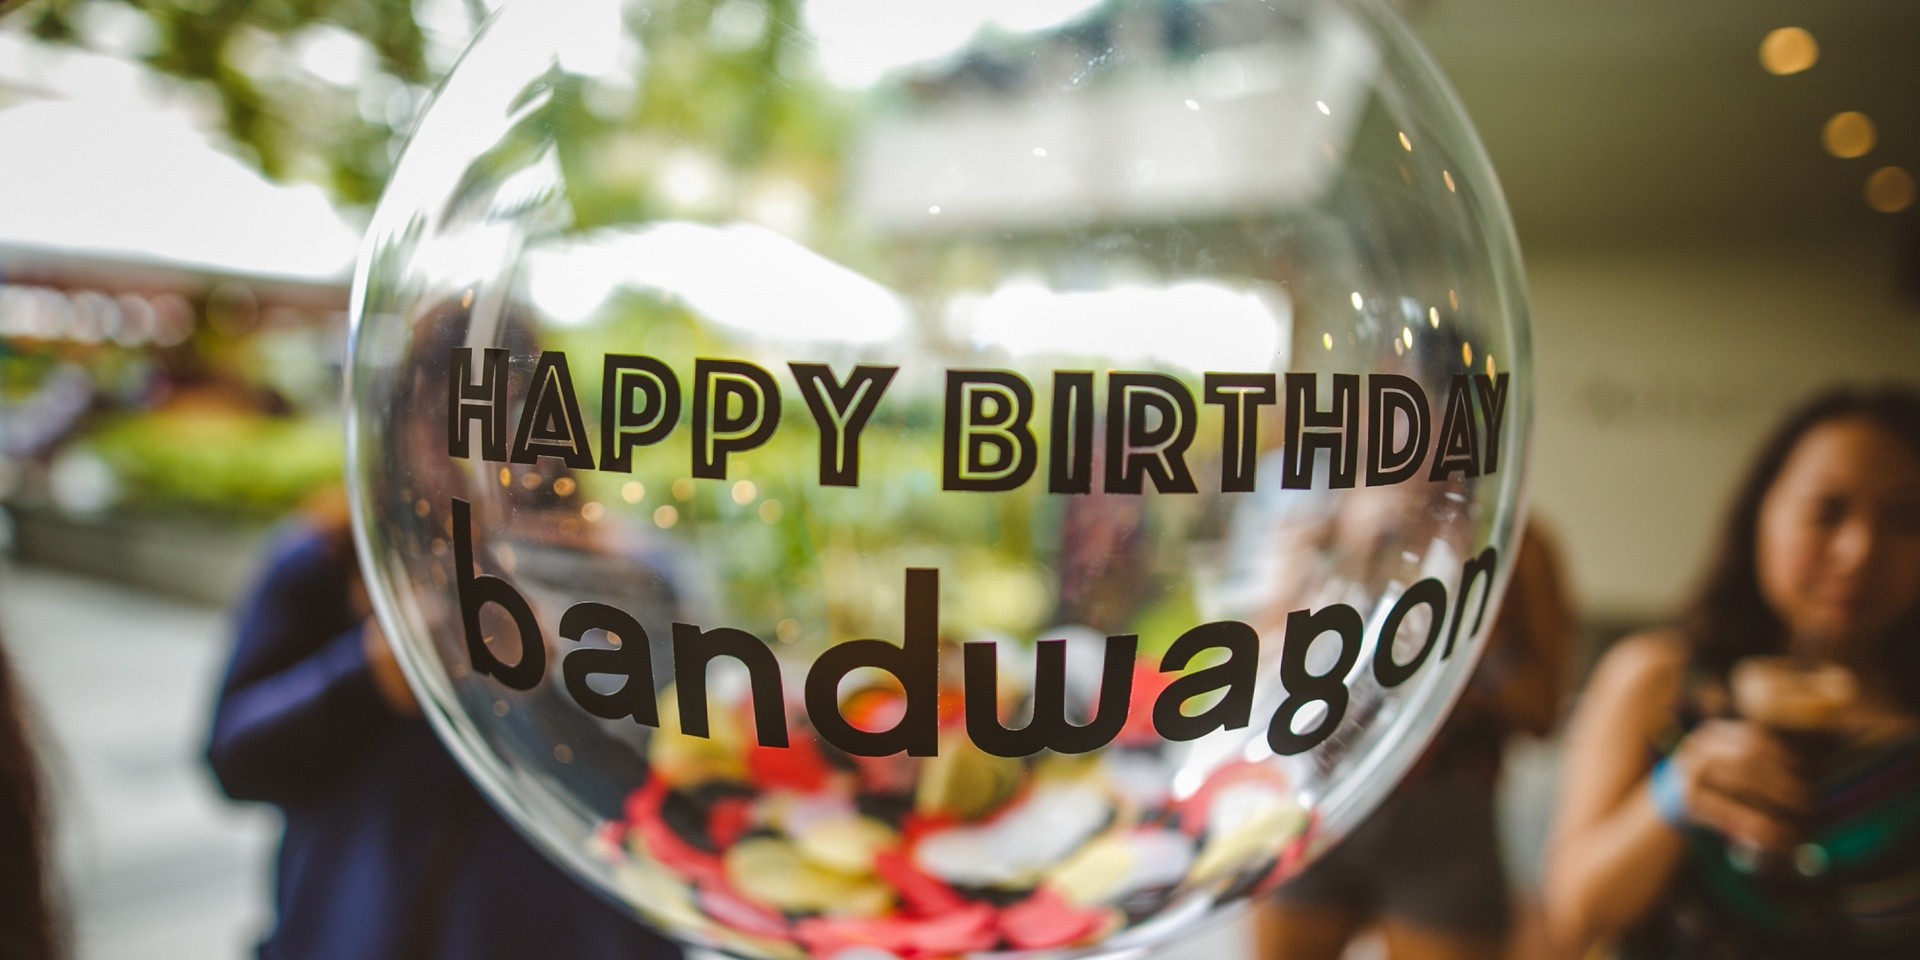 4 reasons why you should come to the Bandwagon Birthday this Thursday